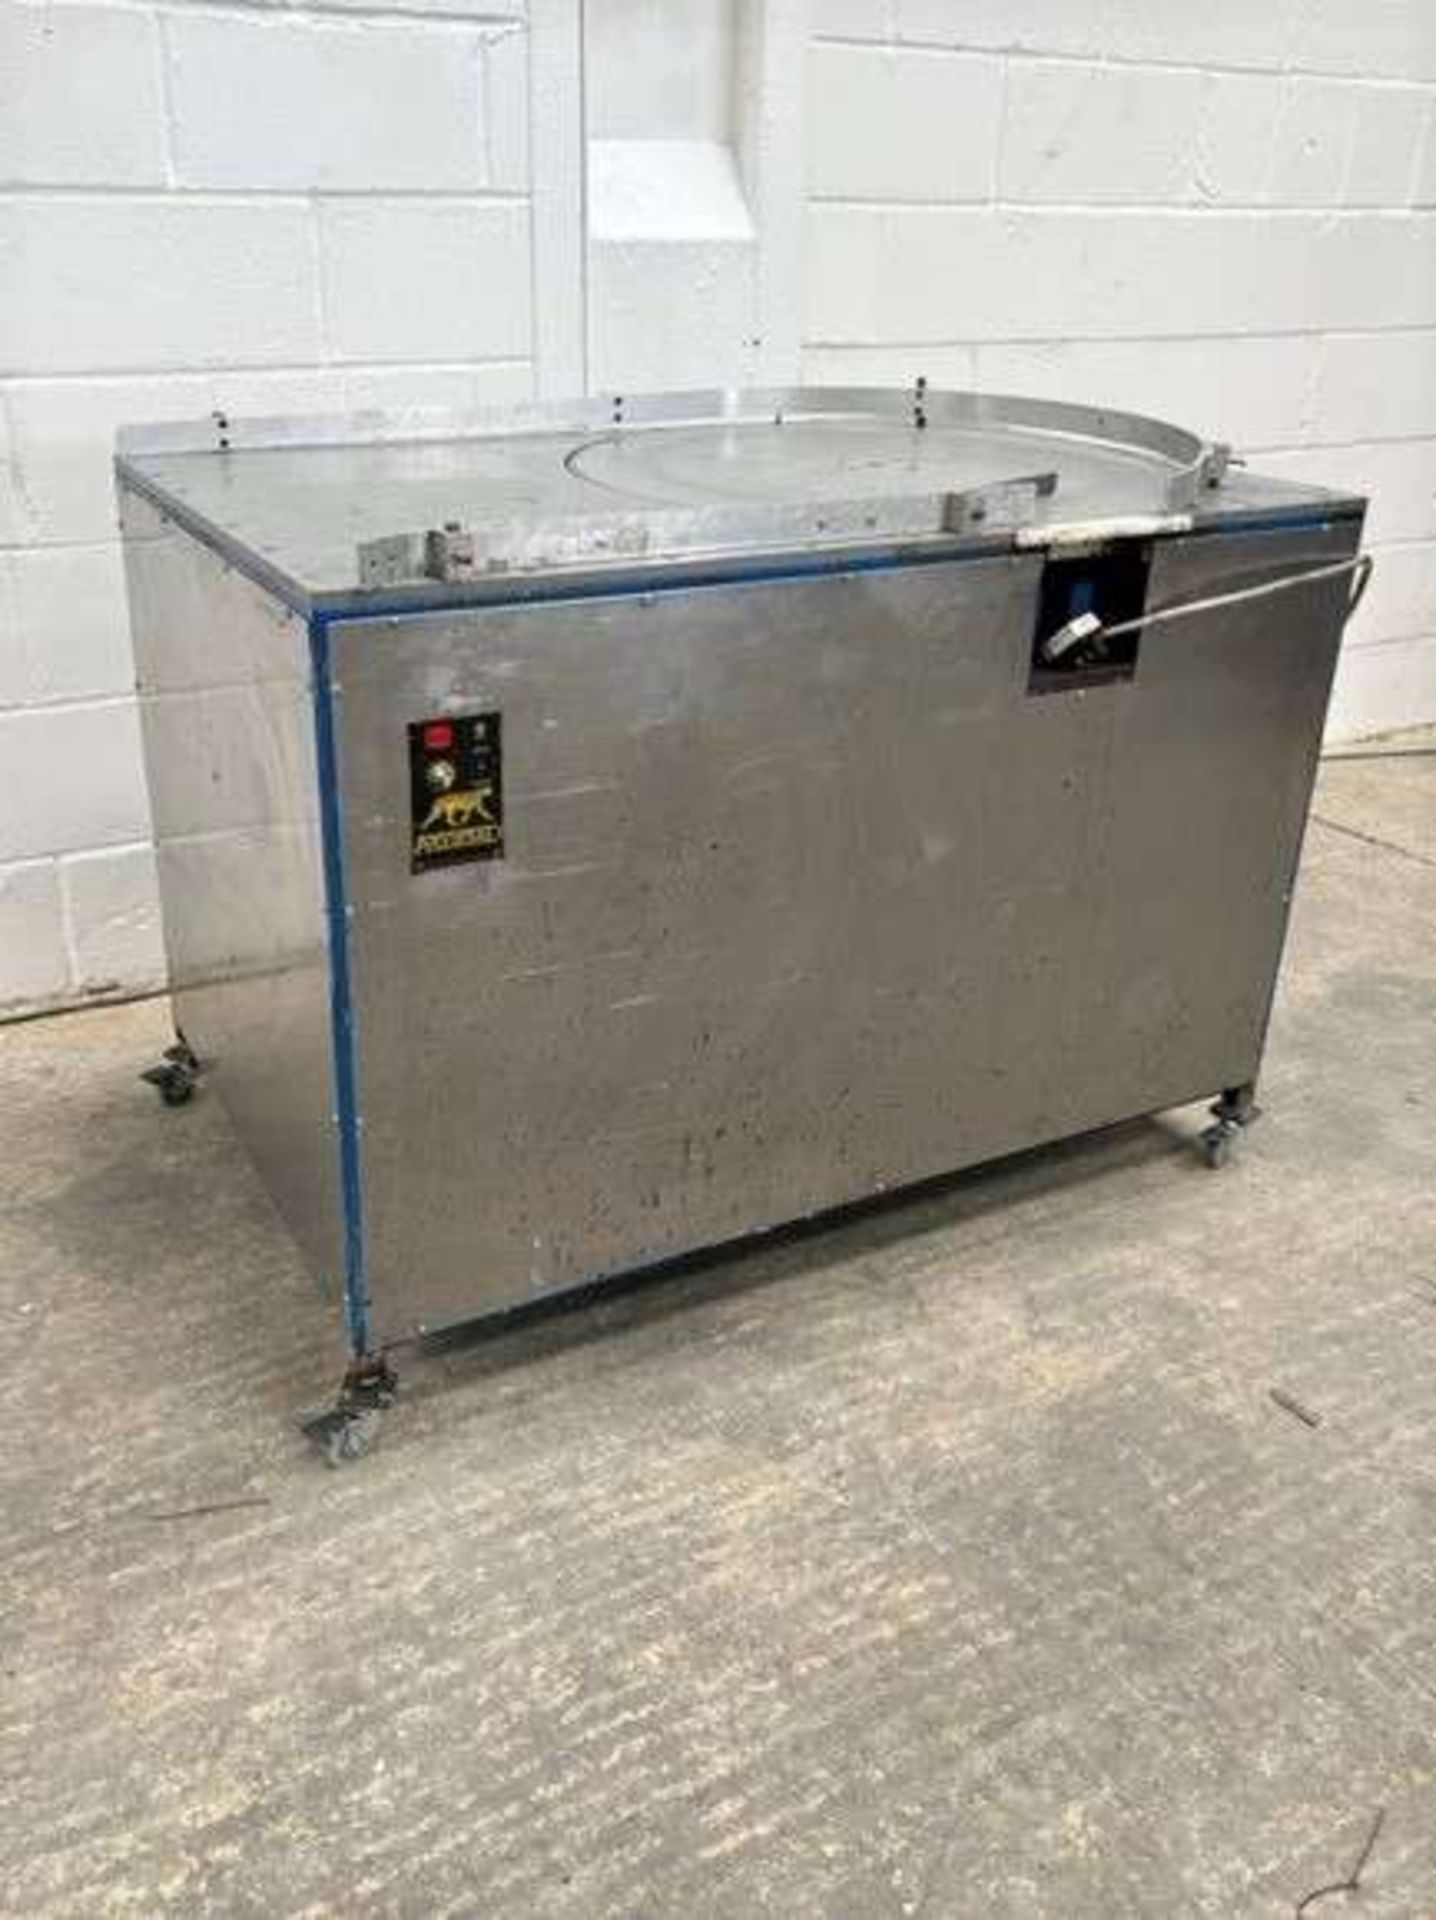 Stainless Steel Rotary Table 1000mm DIA with built in loading / off-loading bay - Image 2 of 4